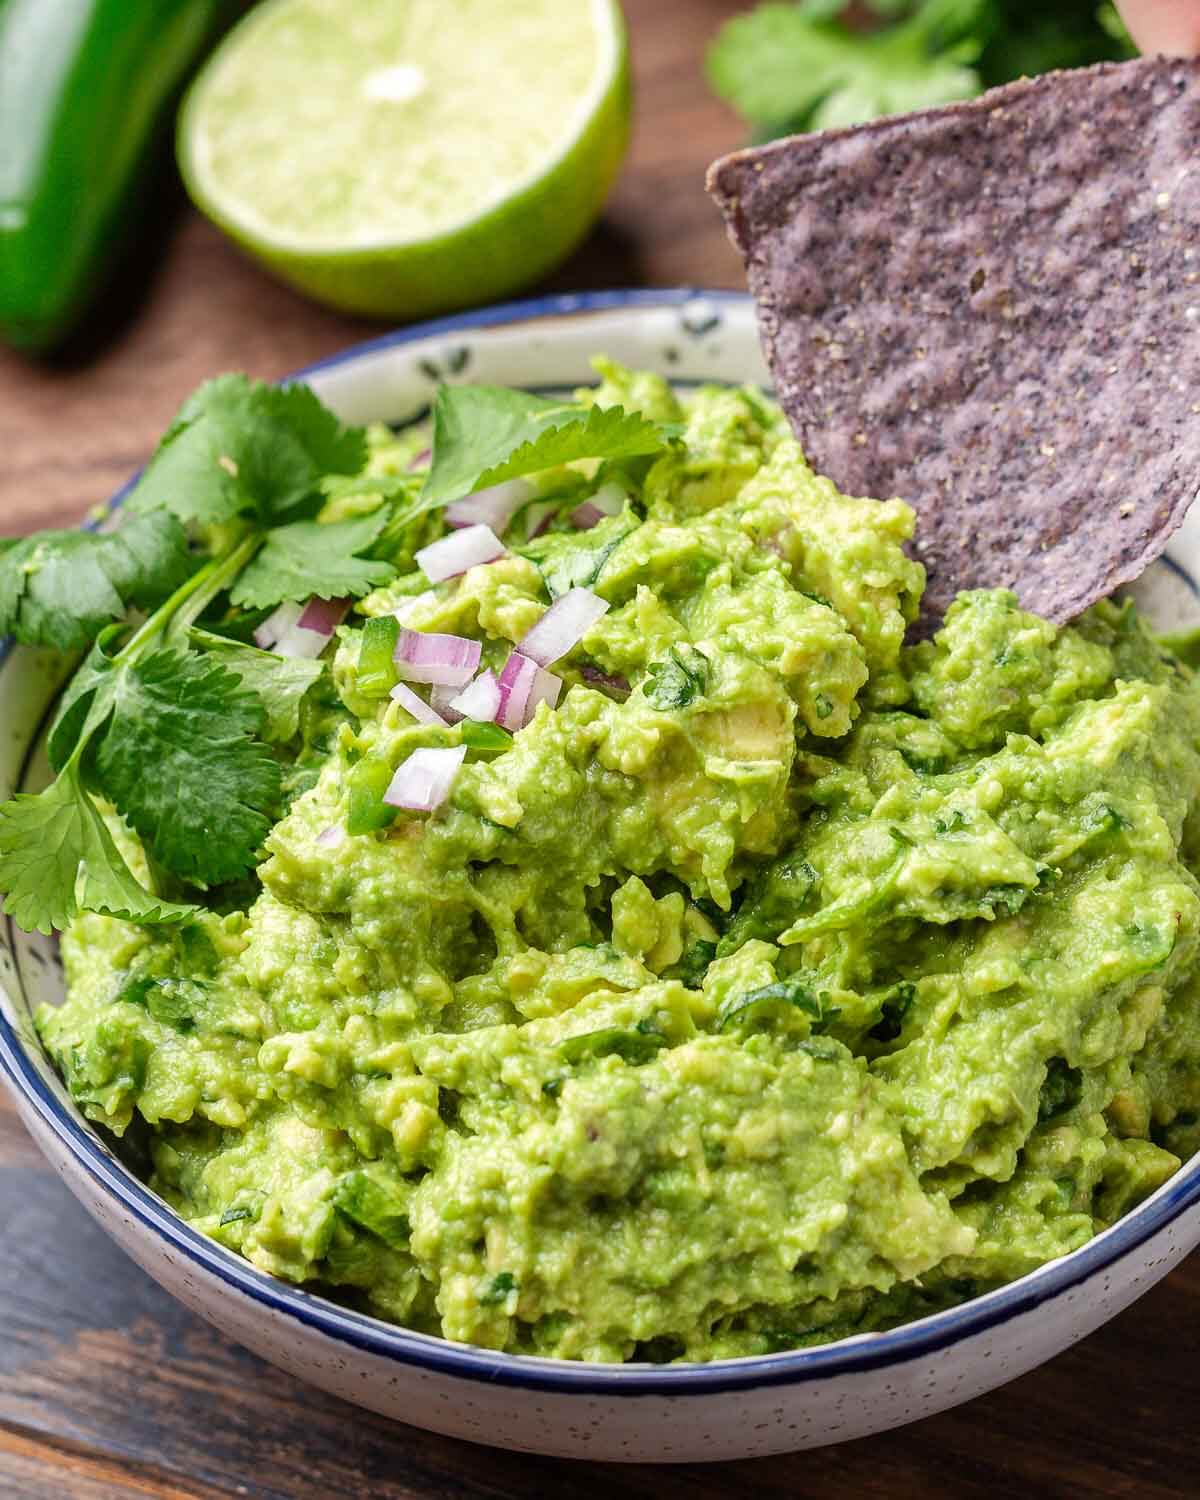 Blue corn chip dipped into bowl of guacamole.